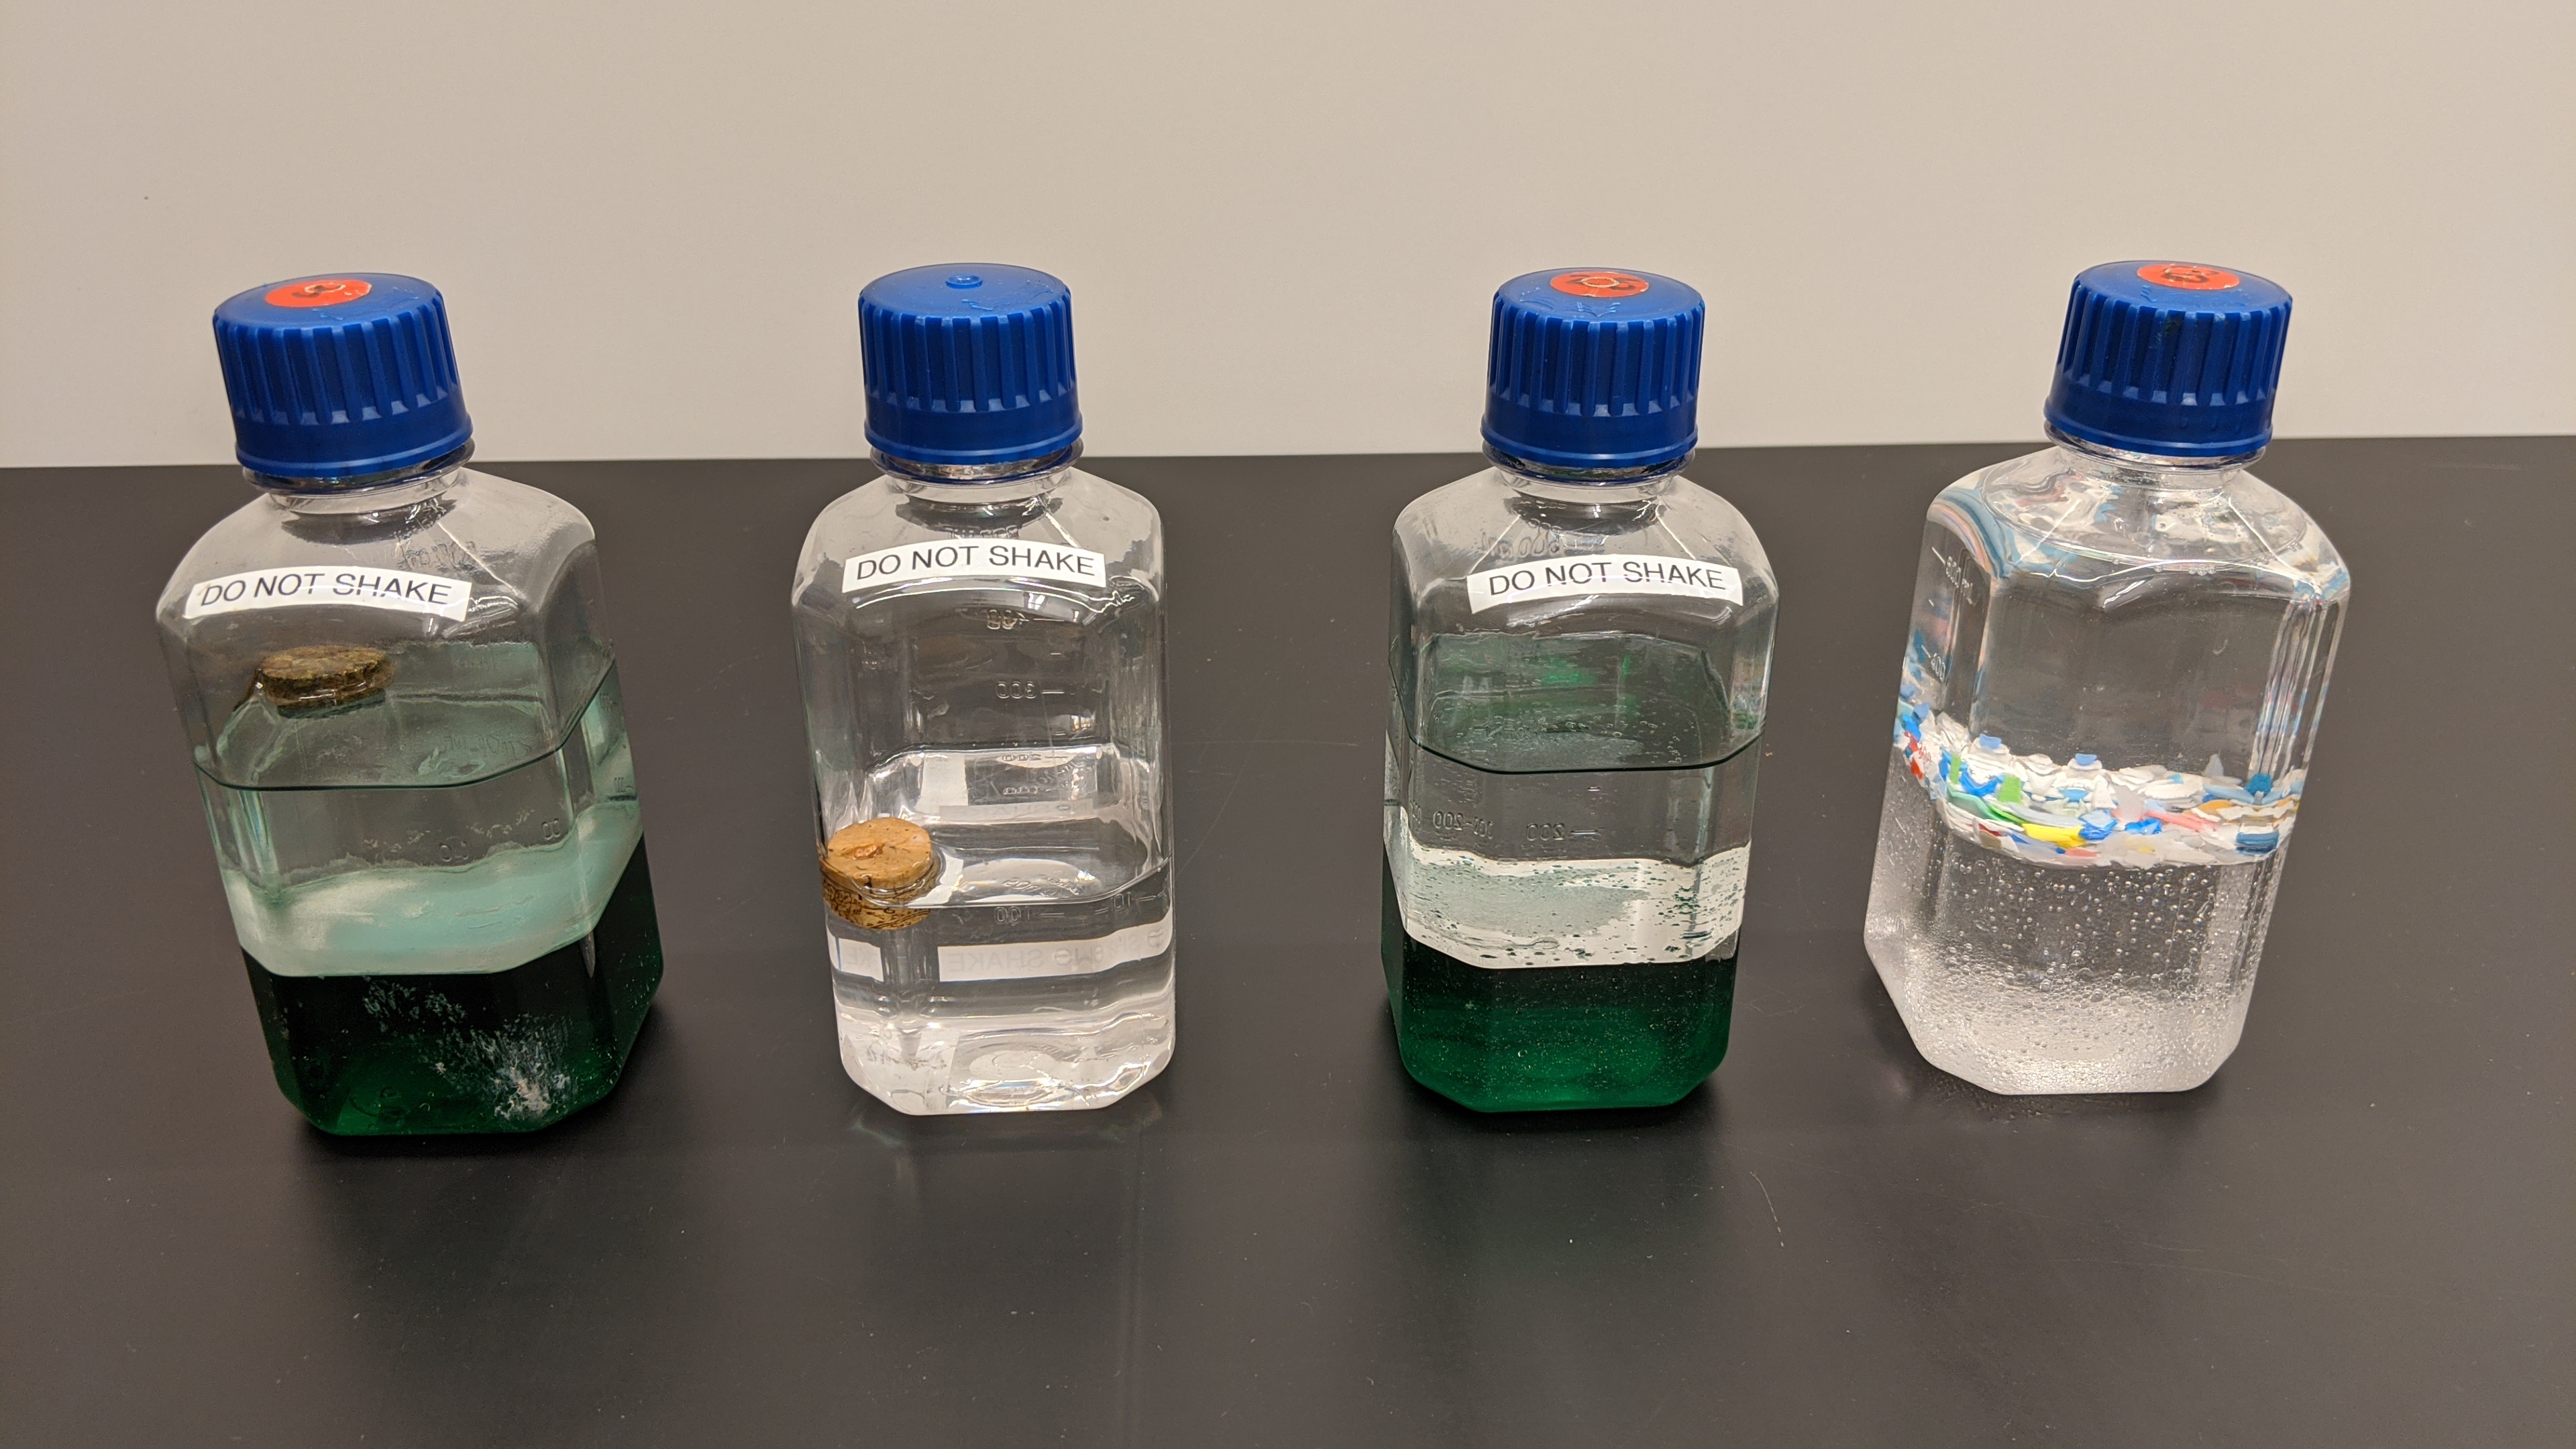 Bottles filled with fluids of different densities